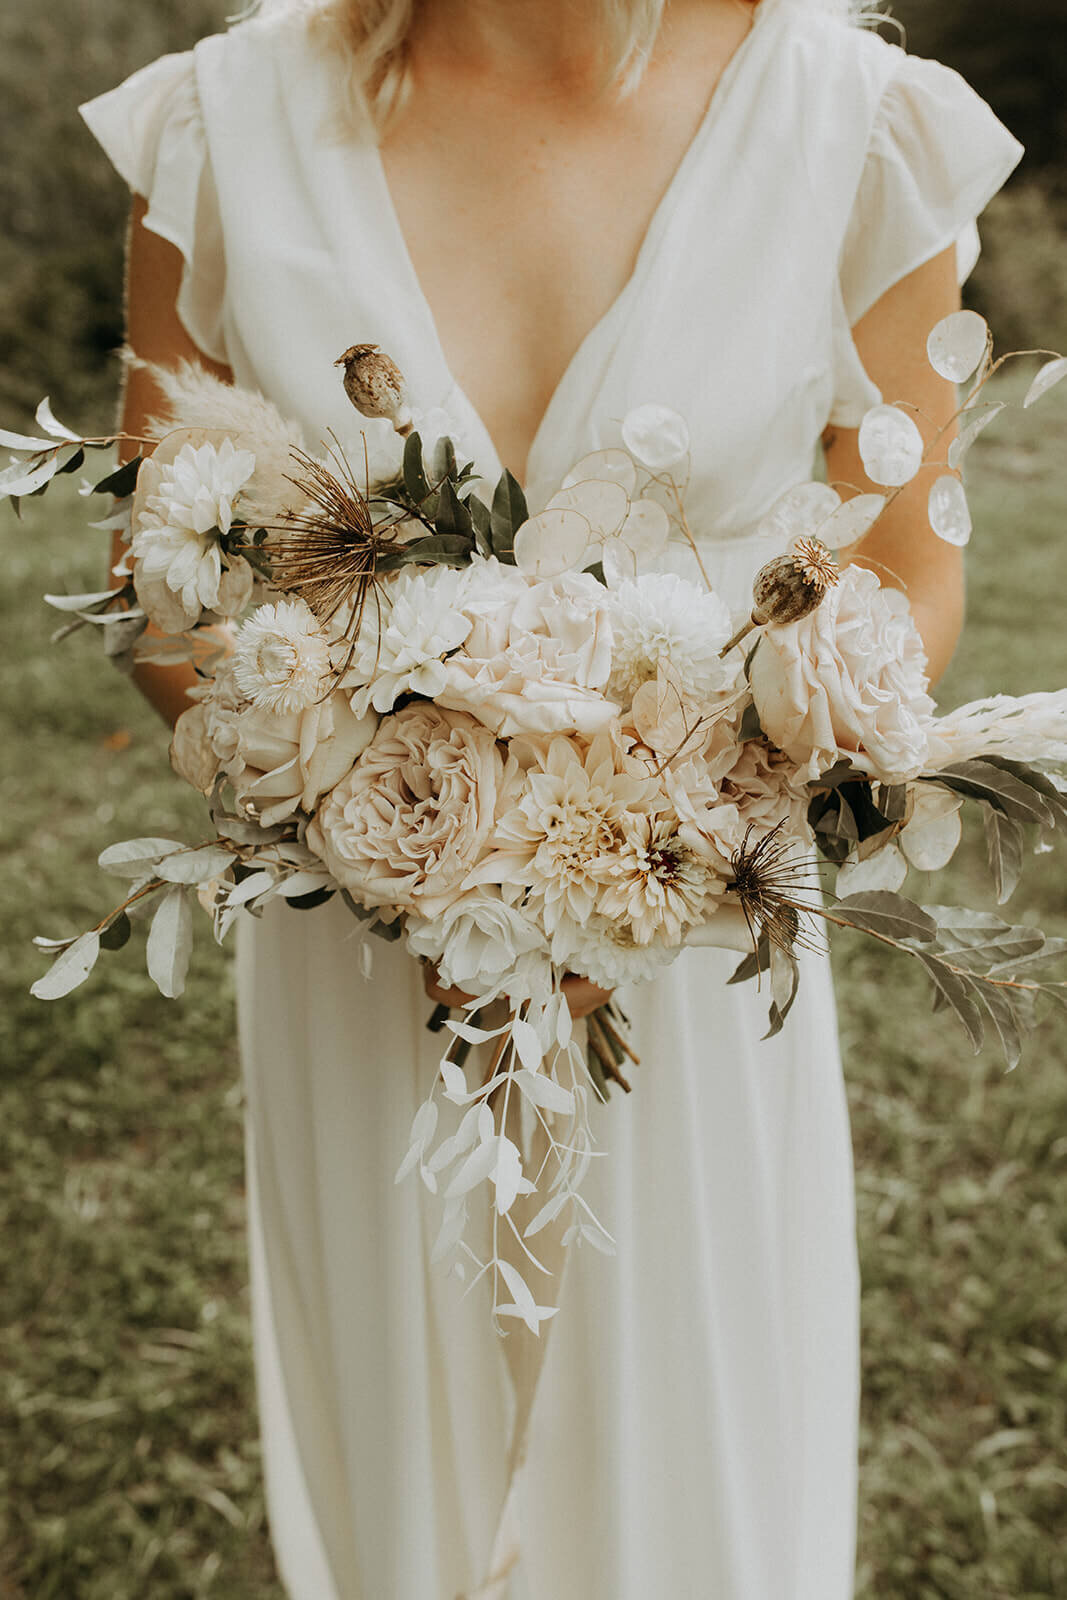 All white bouquet for an elopement in the Smoky Mountains